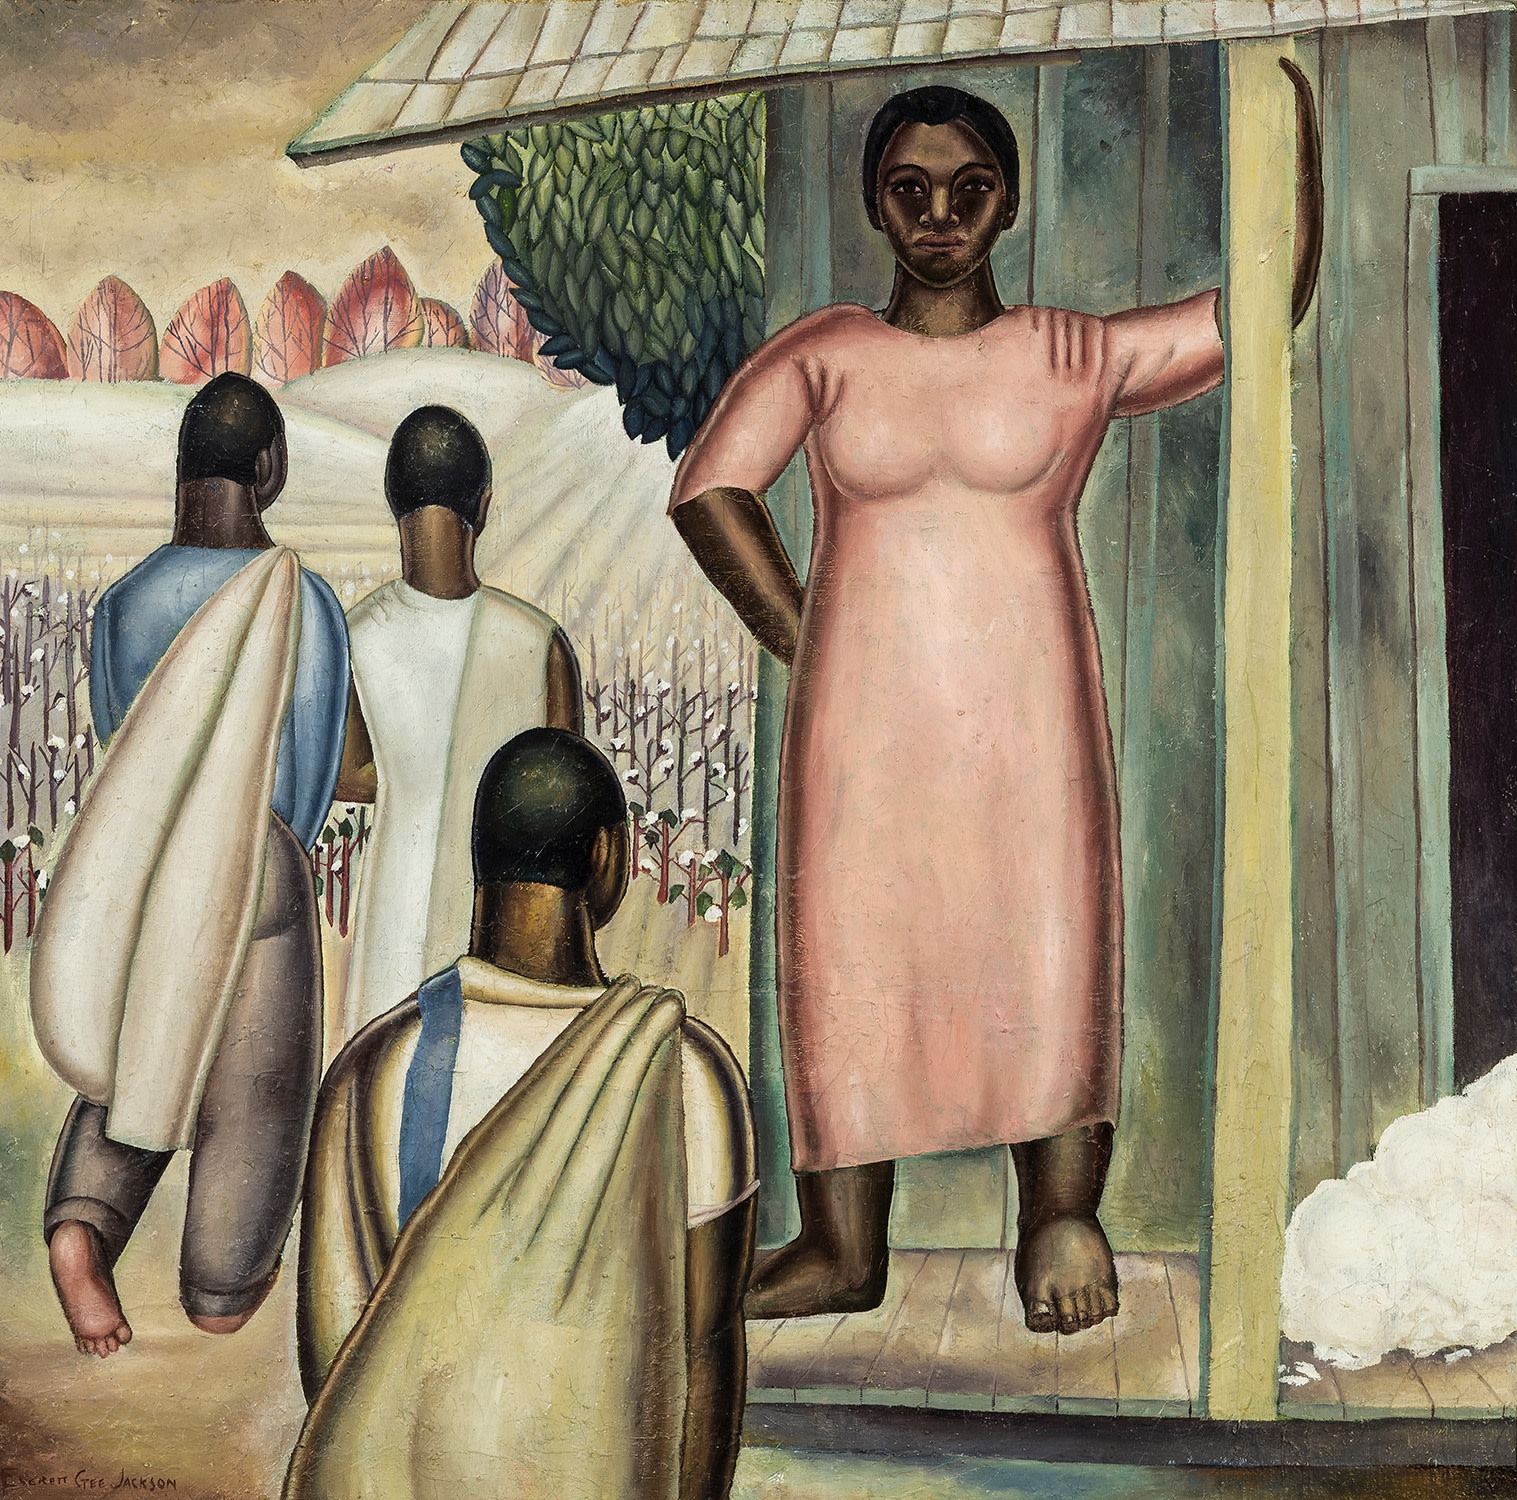 To Pick the Top Crop, 1932, Oil on canvas, 31 7/8 x 32 in.